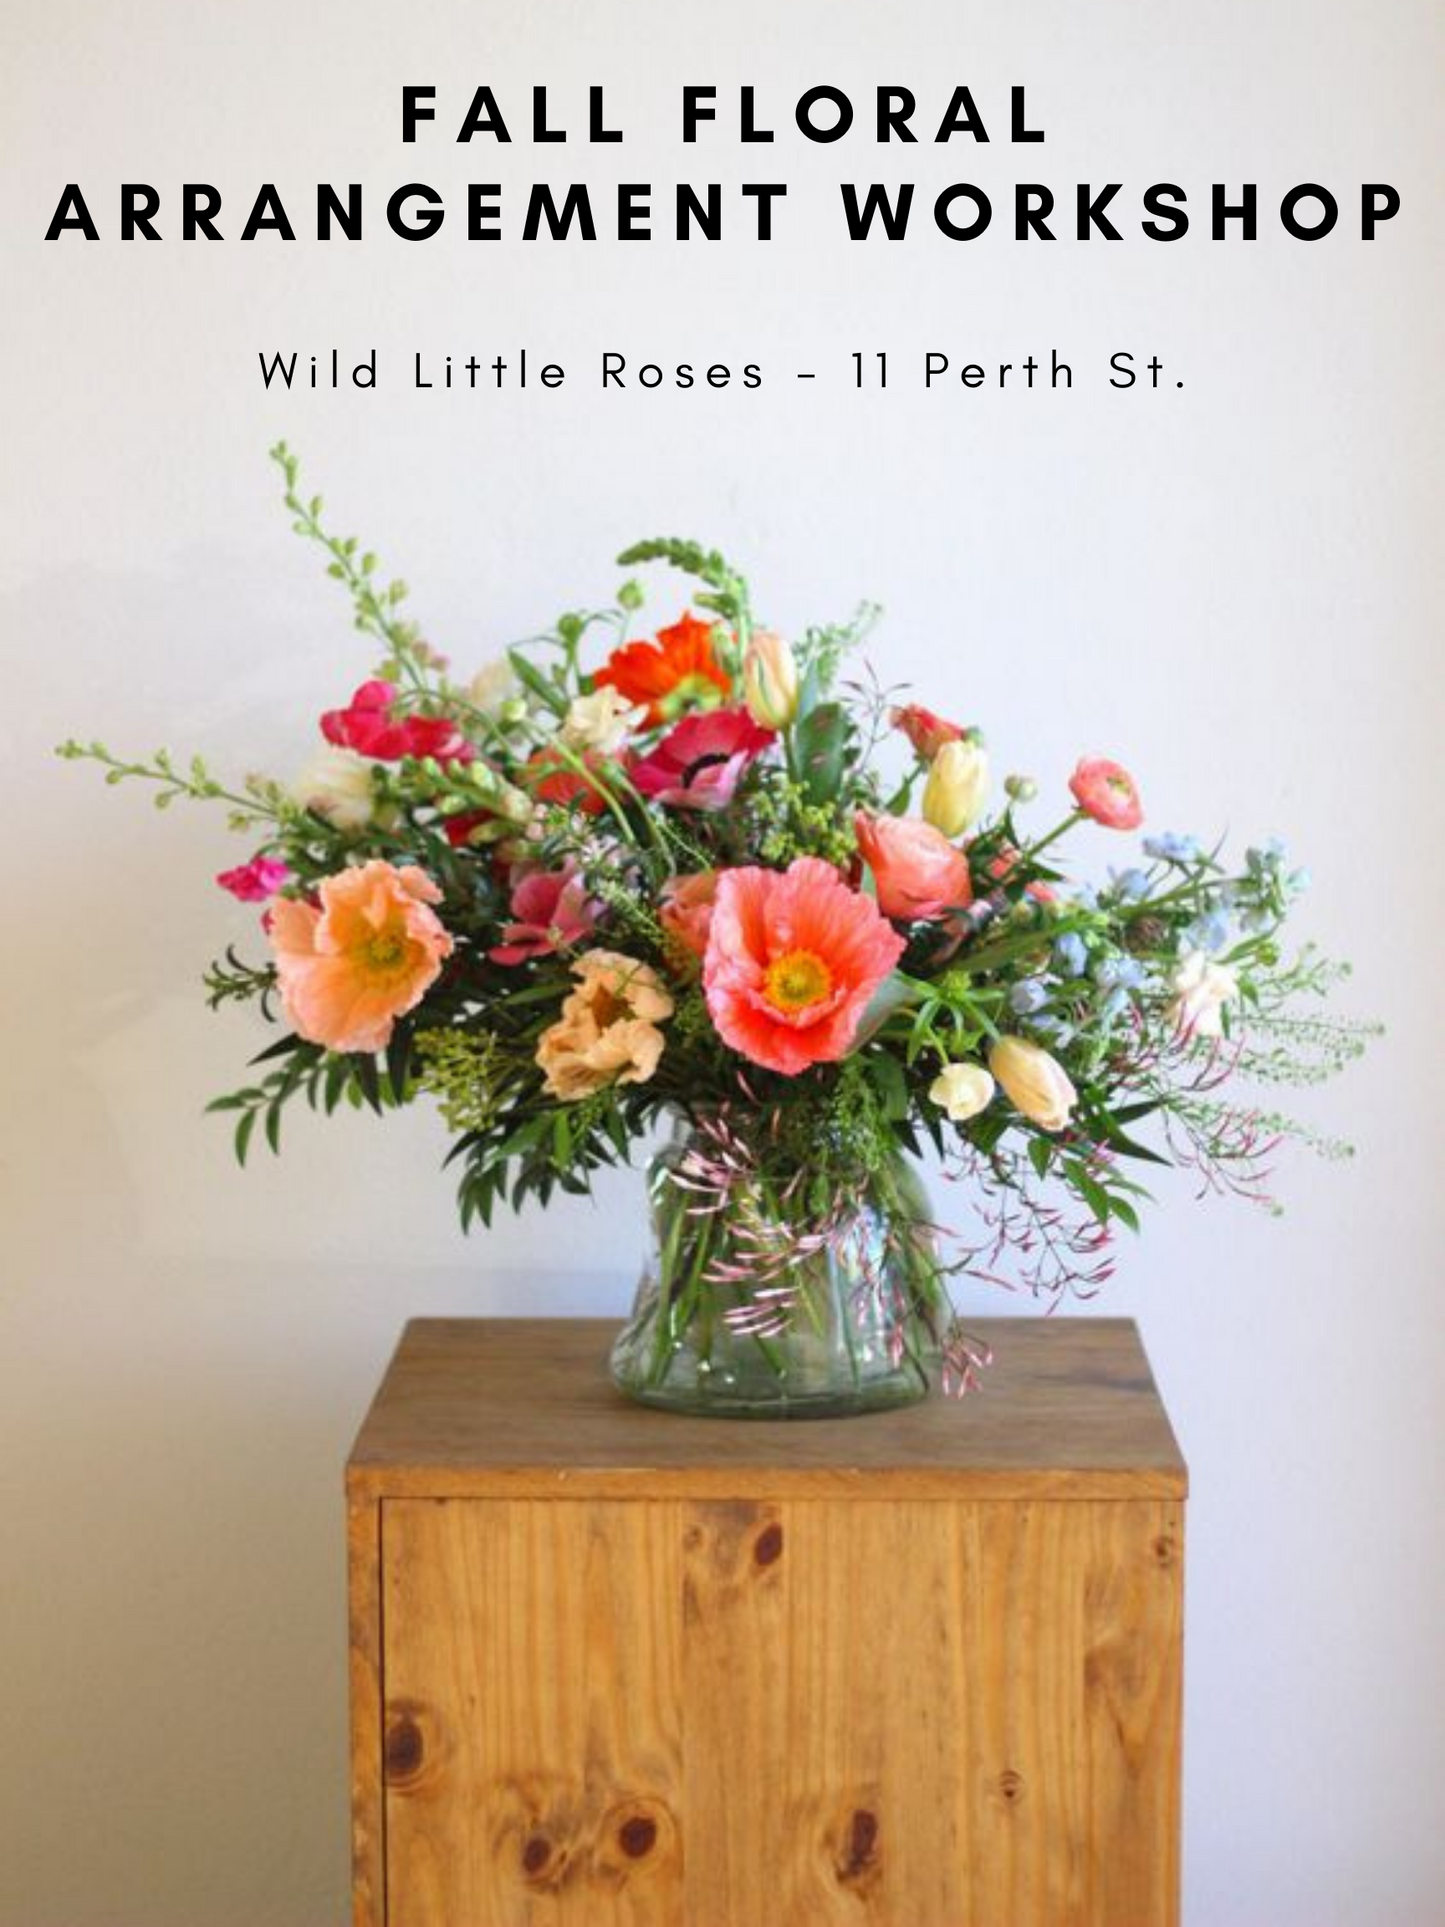 Private Workshop Options - Wild Little Roses